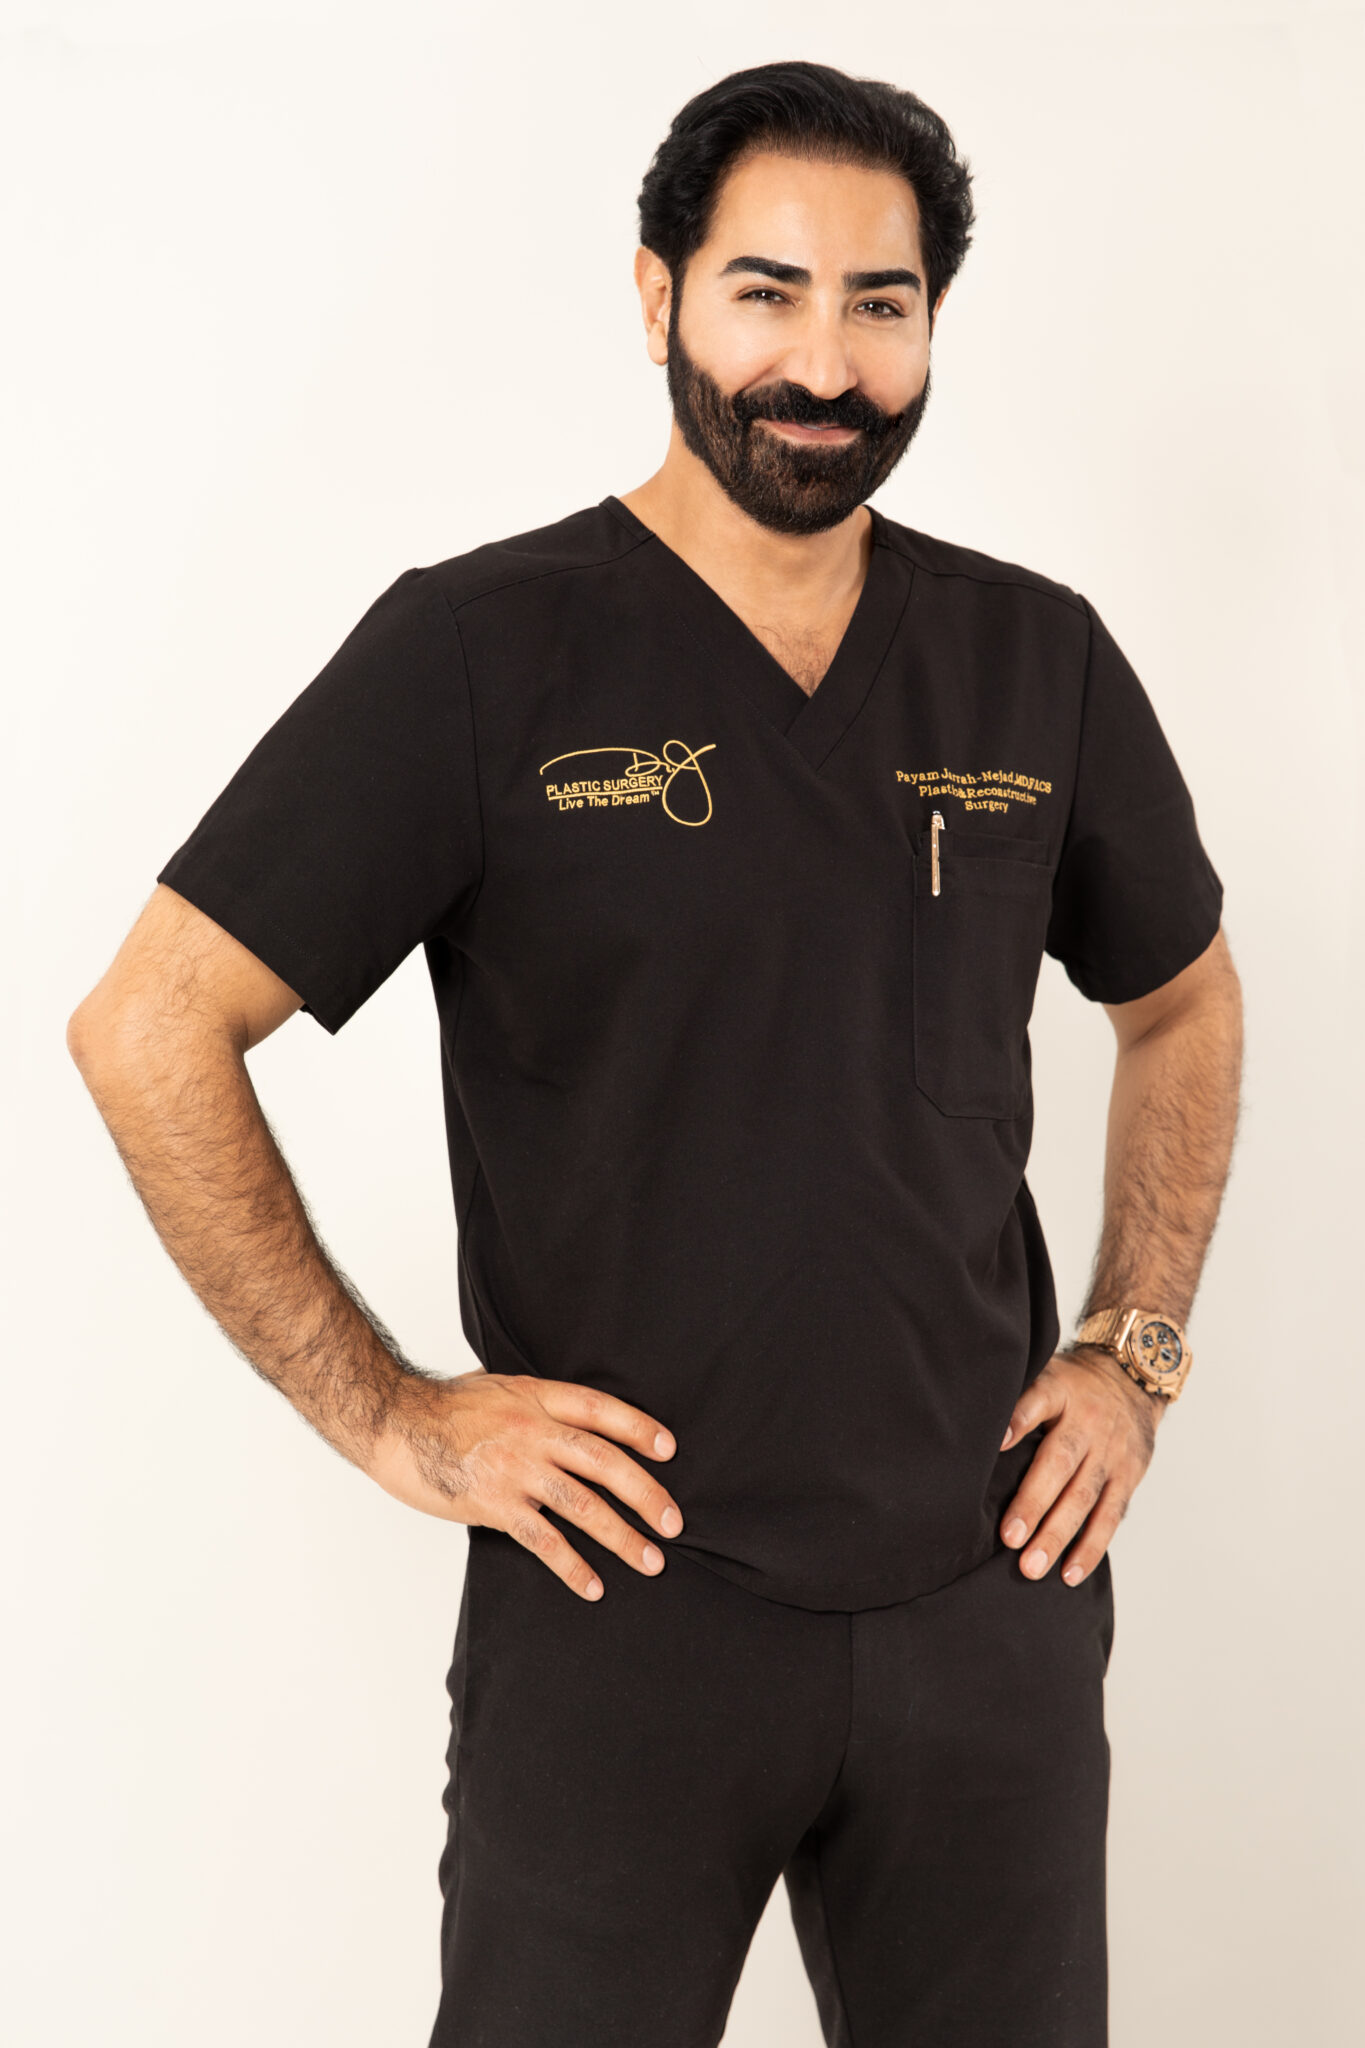 Dr. J Top Plastic Surgeon in Beverly Hills / Los Angeles